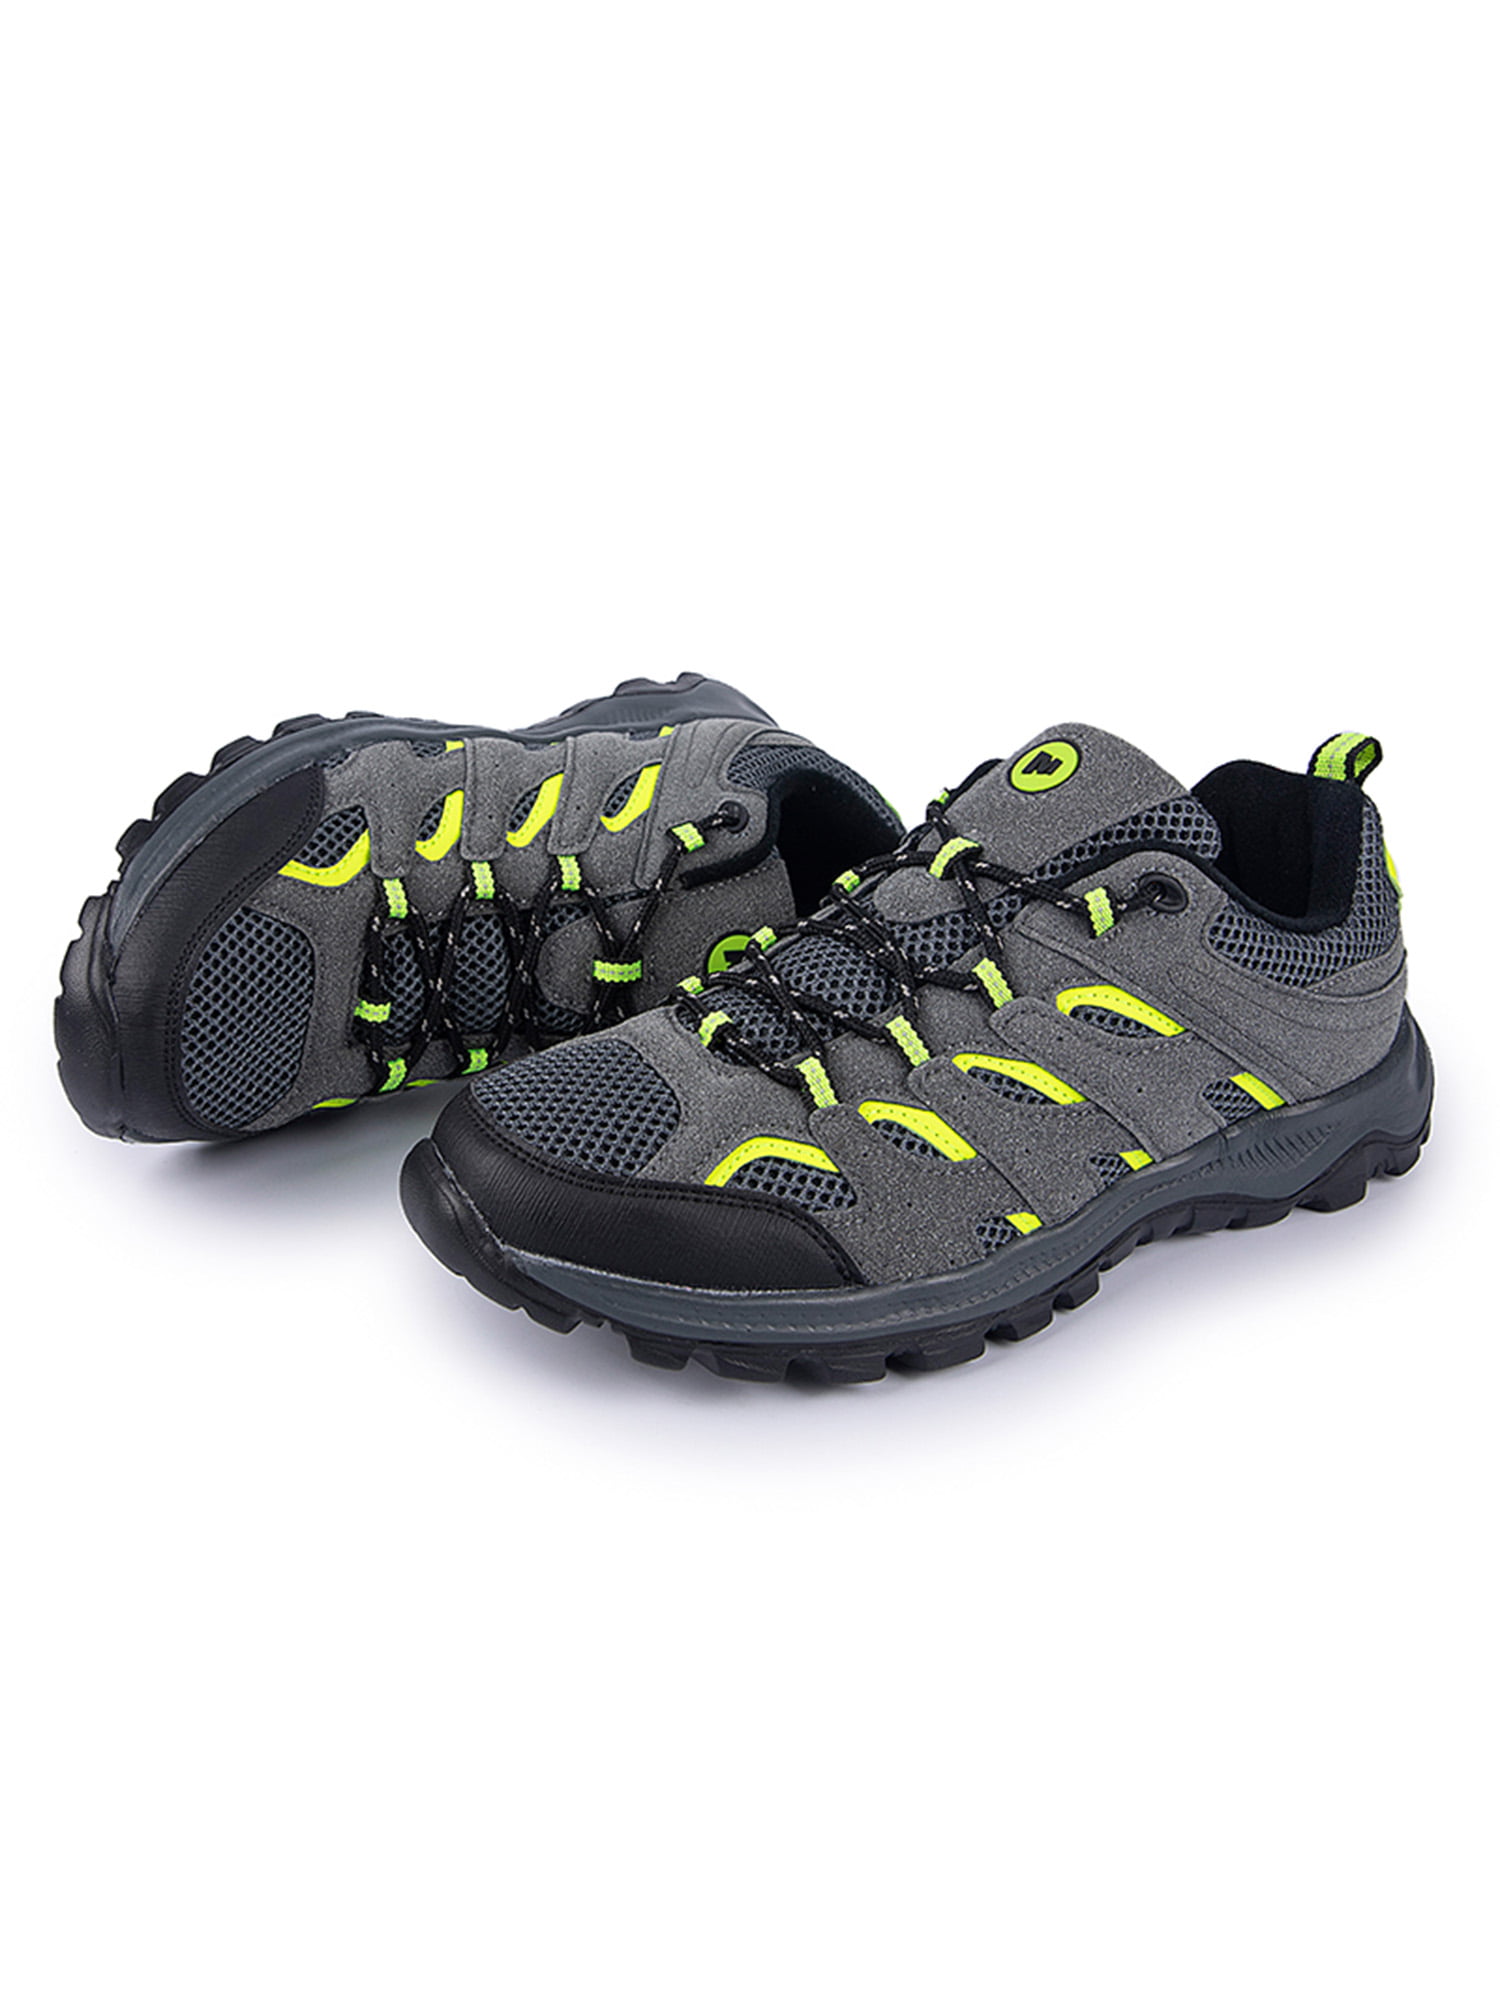 Details about   Mens Walking New Steel Toe Cap Trainers Work Boots Casual Sports Safety Shoes 